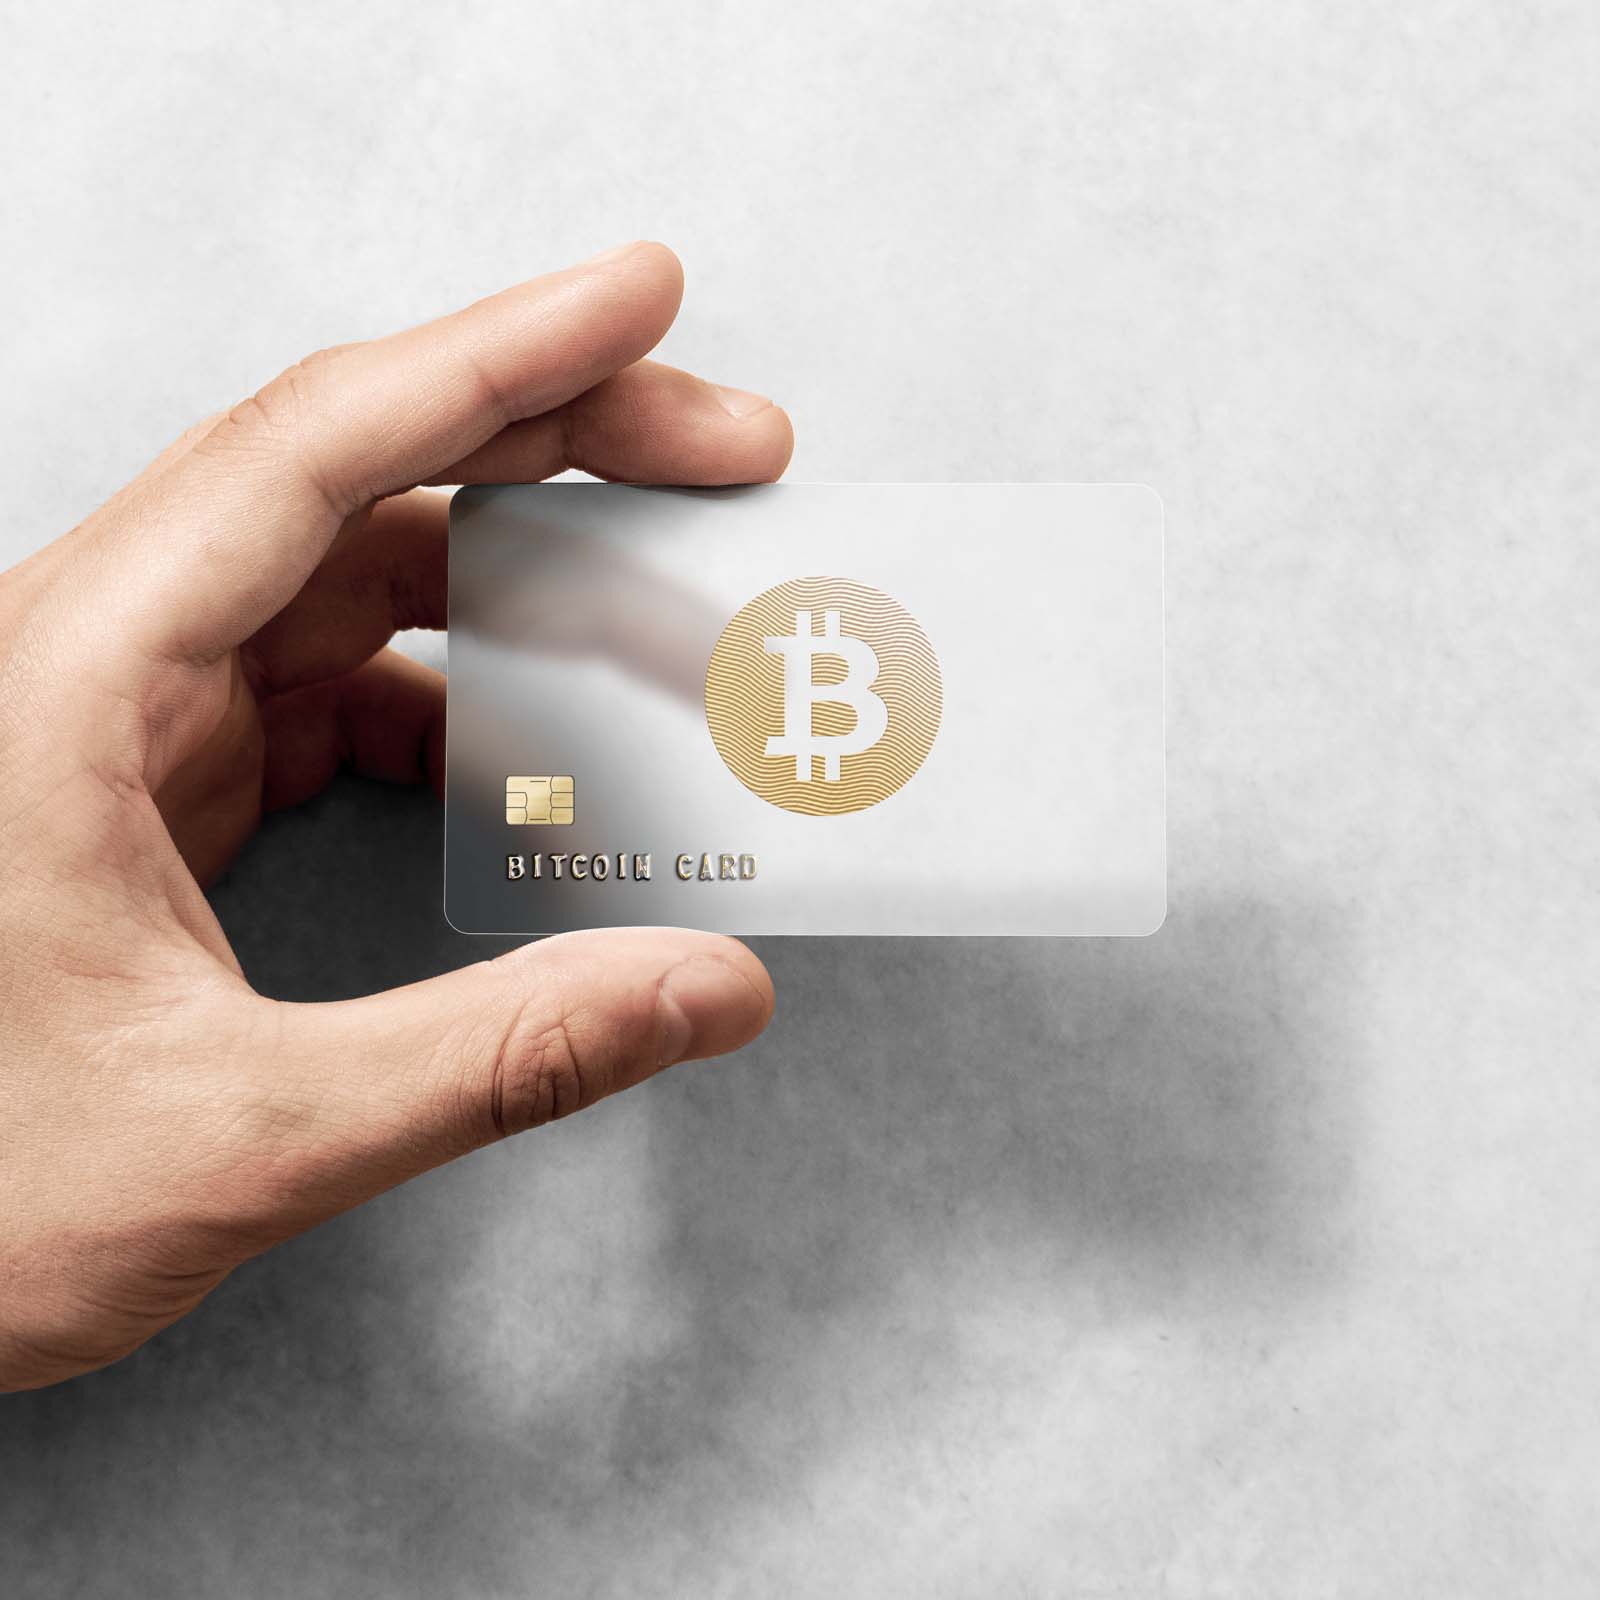 Crypto Cards You Can Use to Spend Your Digital Coins